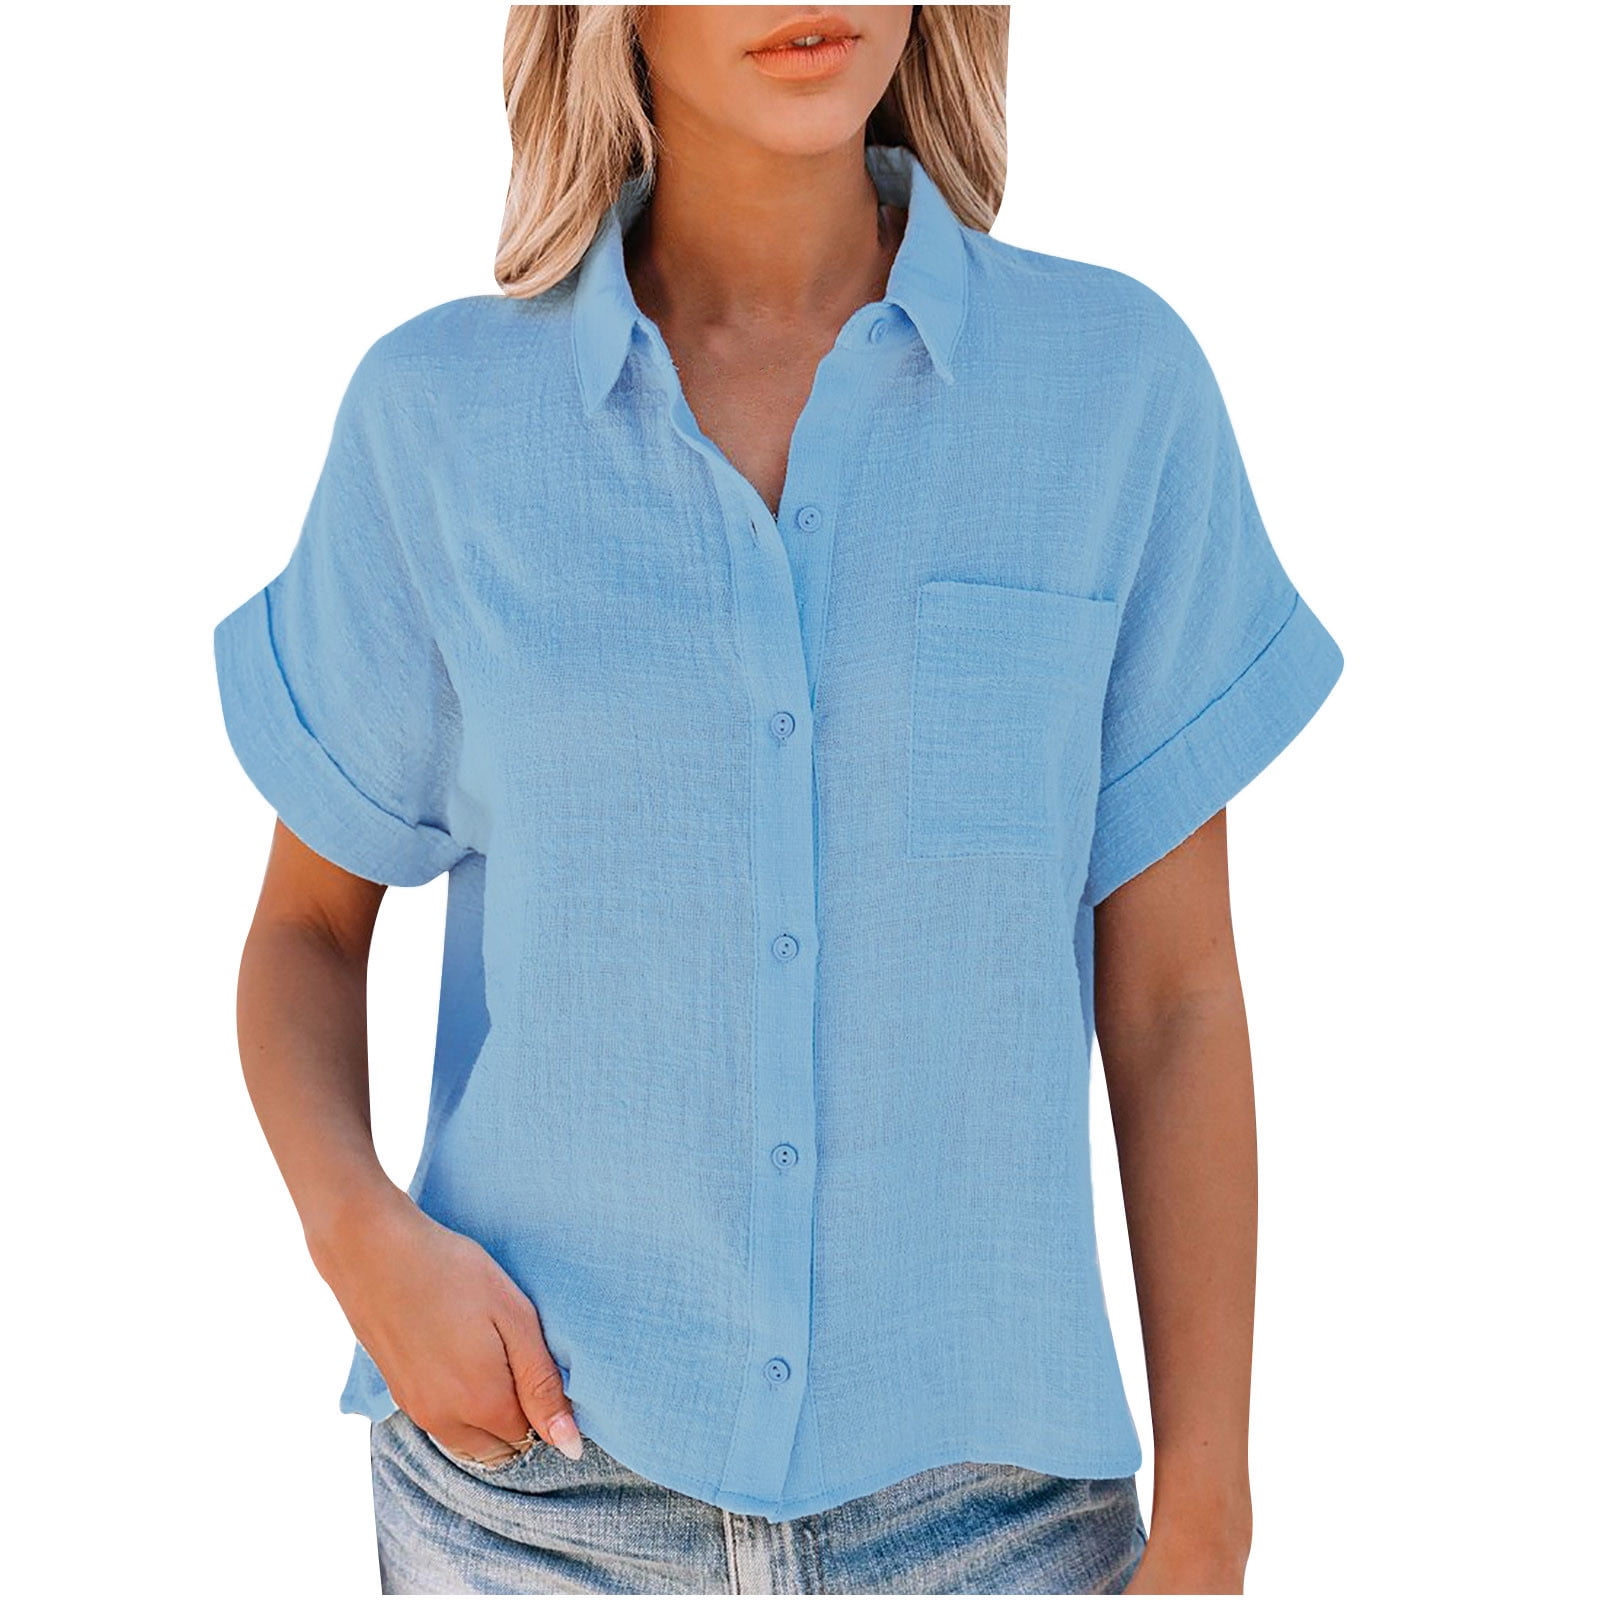 Yeahitch Casual V Neck Button Down Shirts for Women Solid Short Sleeve  Blouse Tops Light blue M